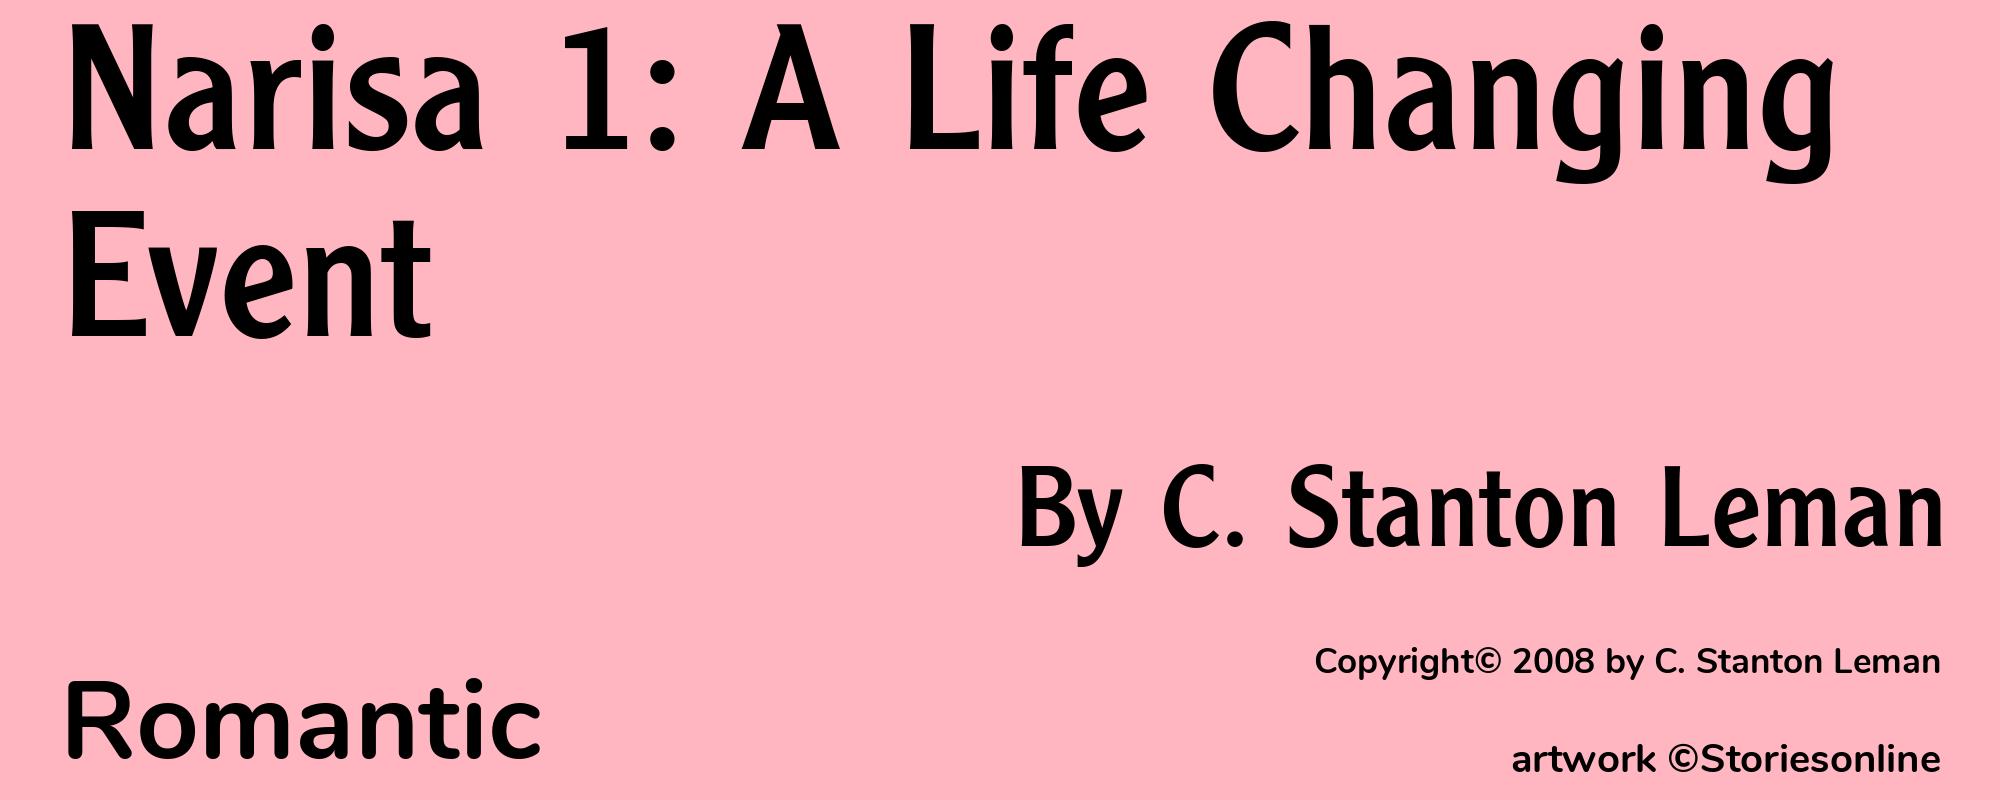 Narisa 1: A Life Changing Event - Cover